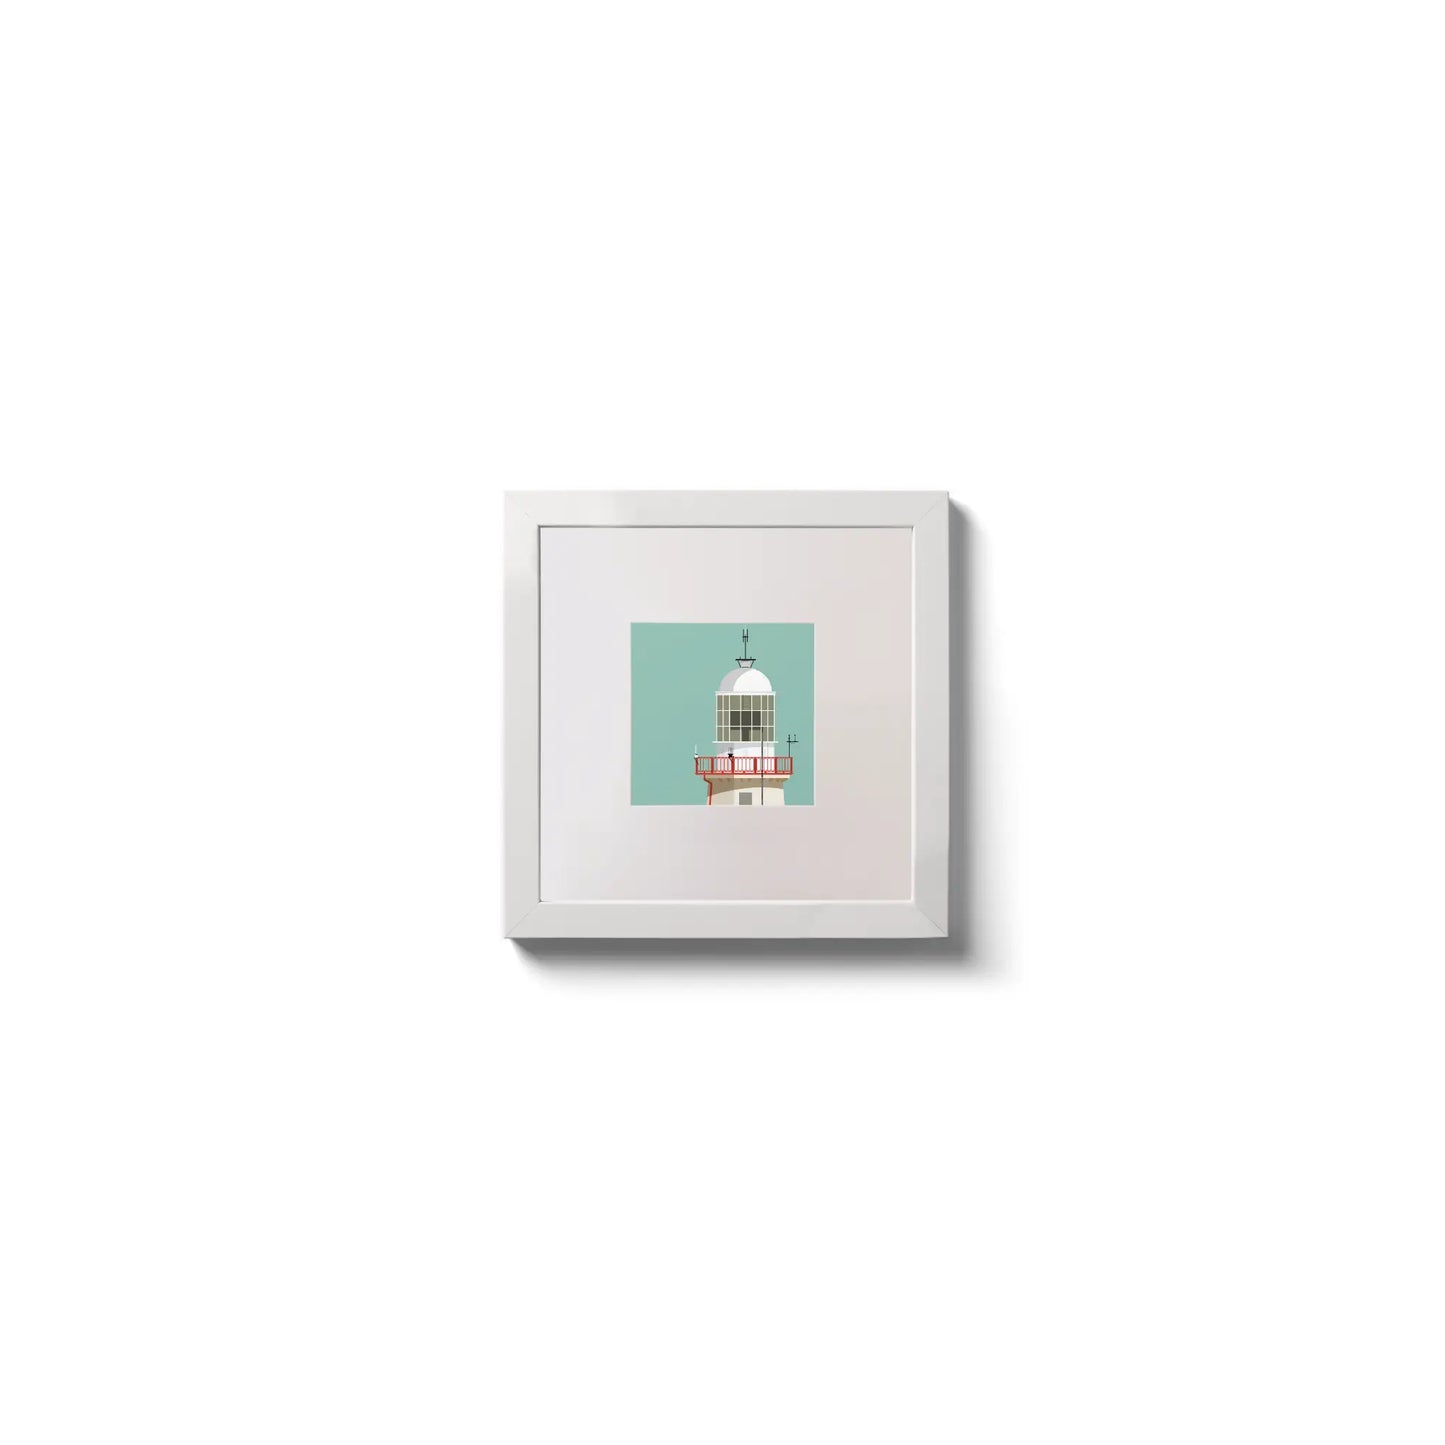 Illustration of The Baily lighthouse on an ocean green background,  in a white square frame measuring 10x10cm.